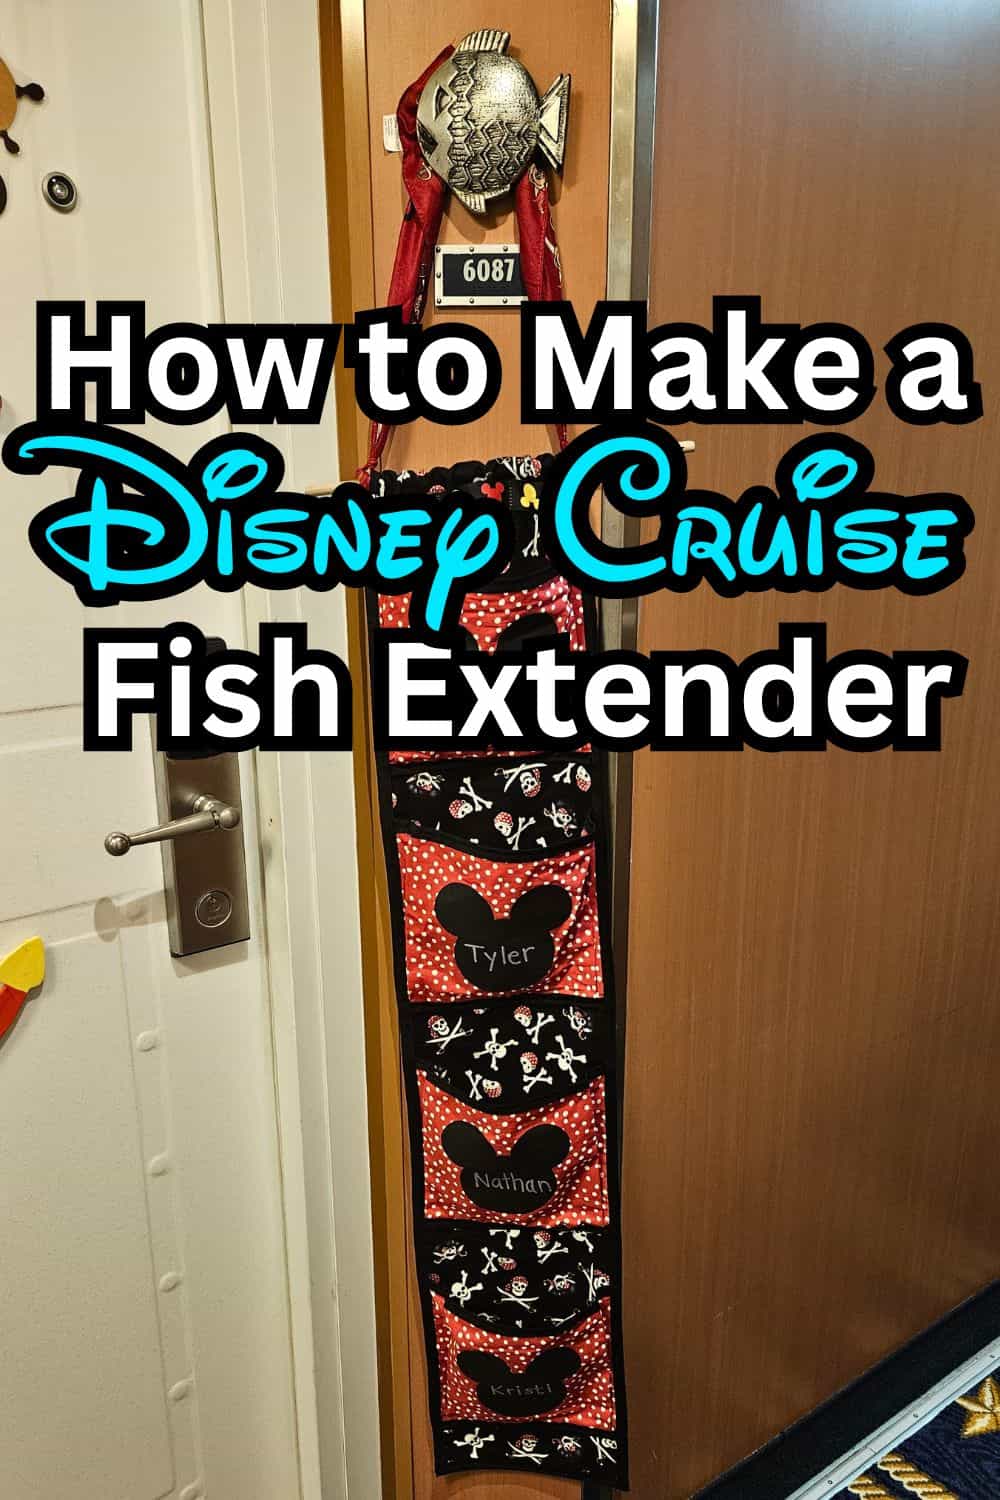 How to Make a Fish Extender for a Disney Cruise